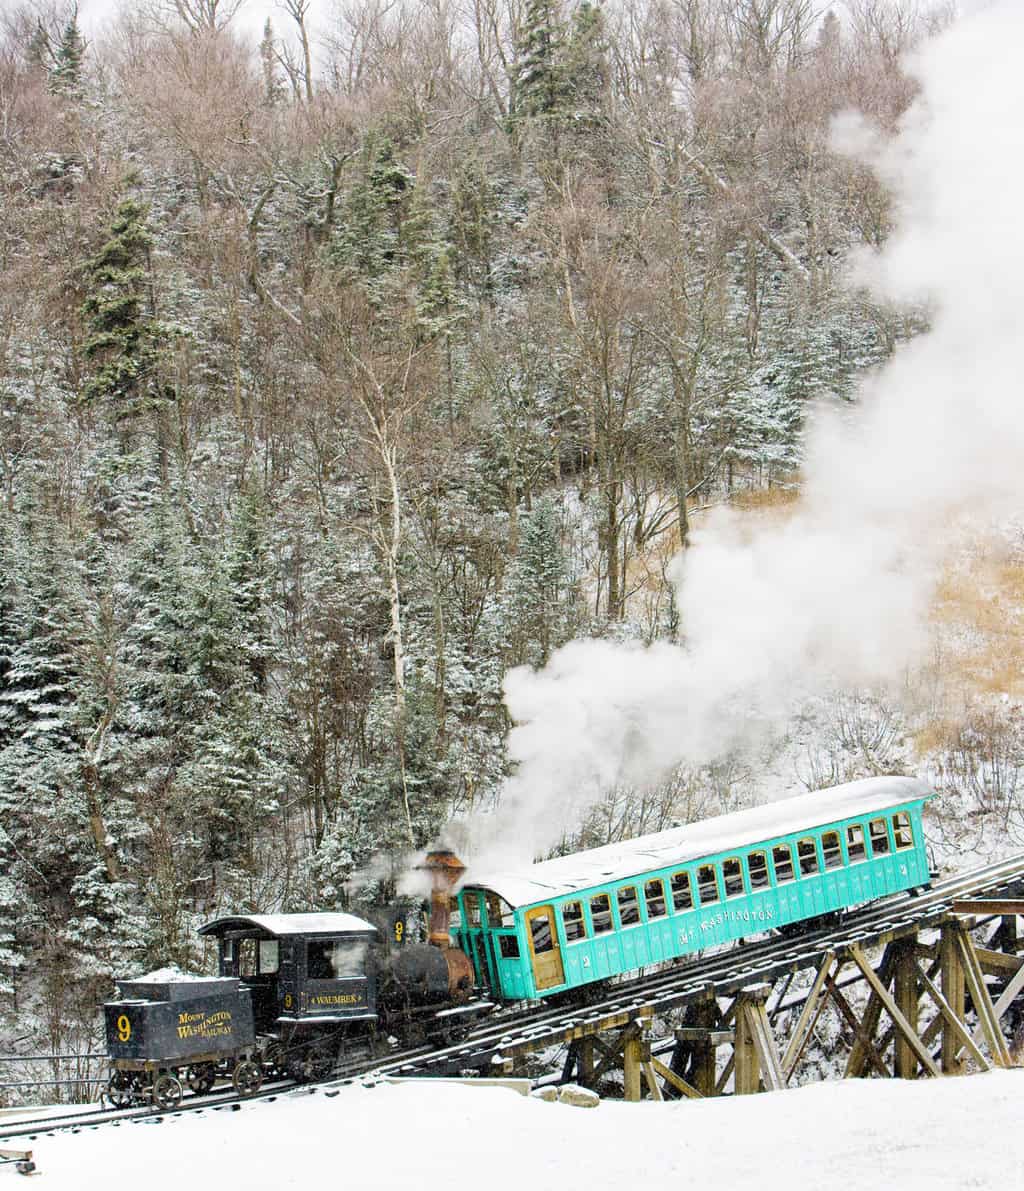 The traitional steam cog train with a green carriage makes its way dow the snowy mountain.